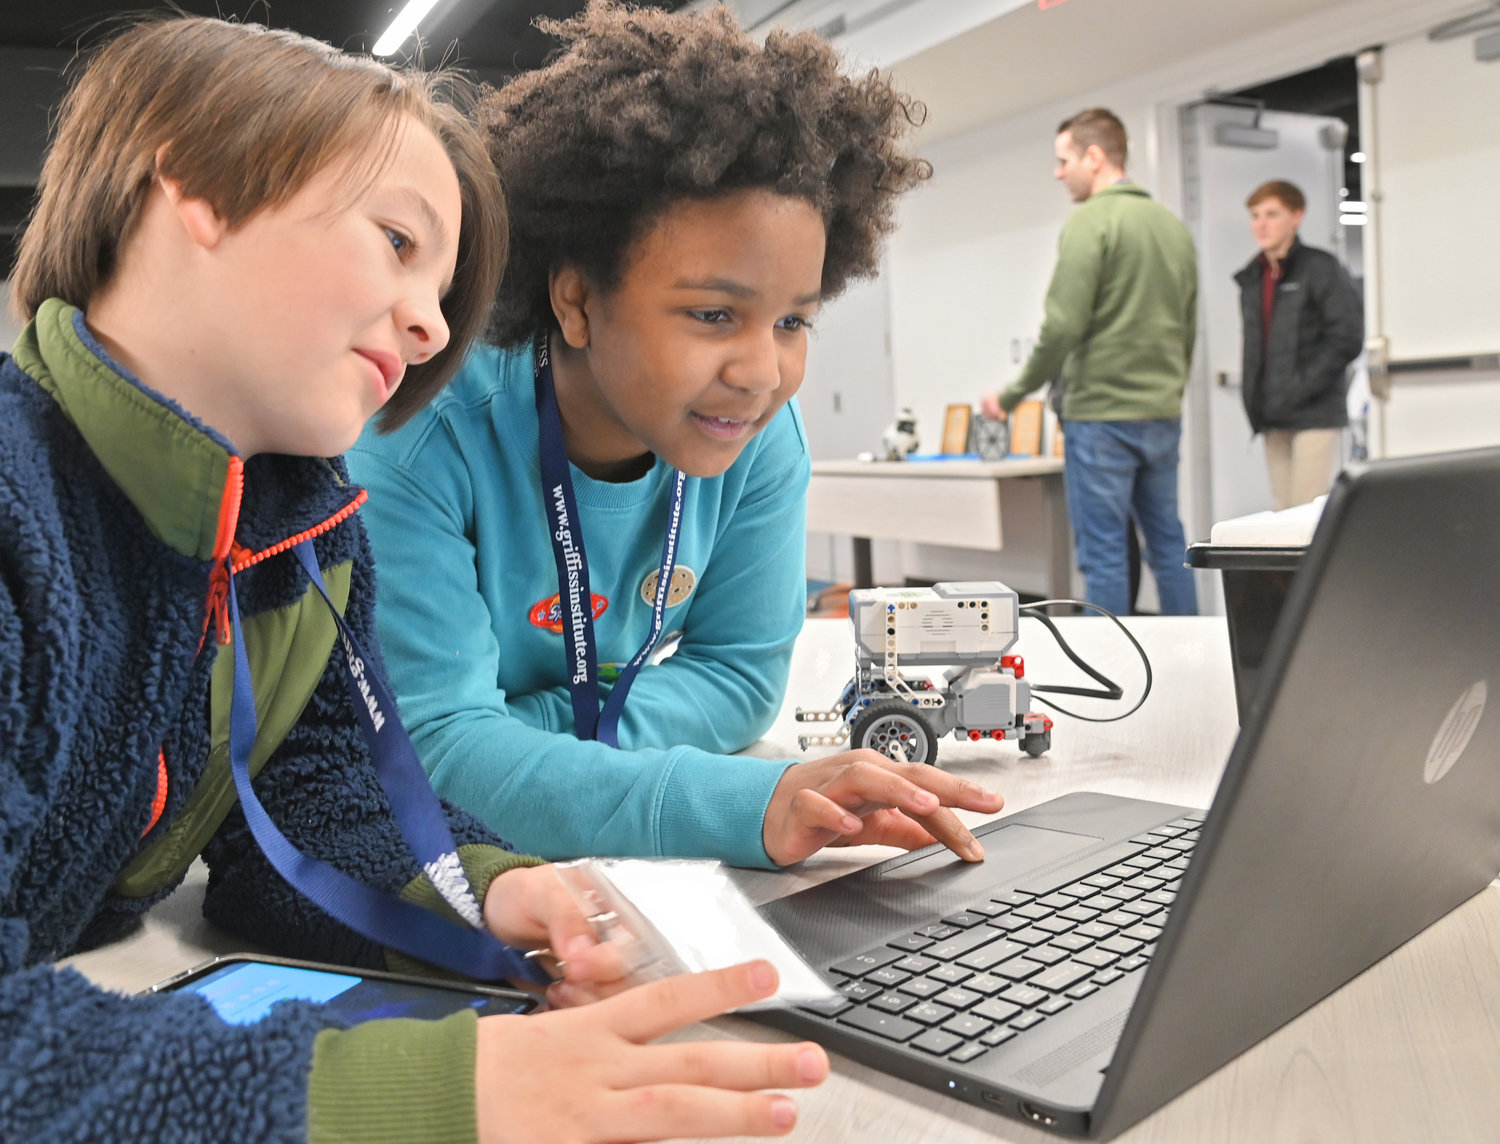 Desmond Thompson and Marli Cook, both fourth graders at Bellamy Elementary School, work on giving their robot personality Tuesday Feb. 21 at Griffiss Institute’s inaugural Robotics Camp in Rome.